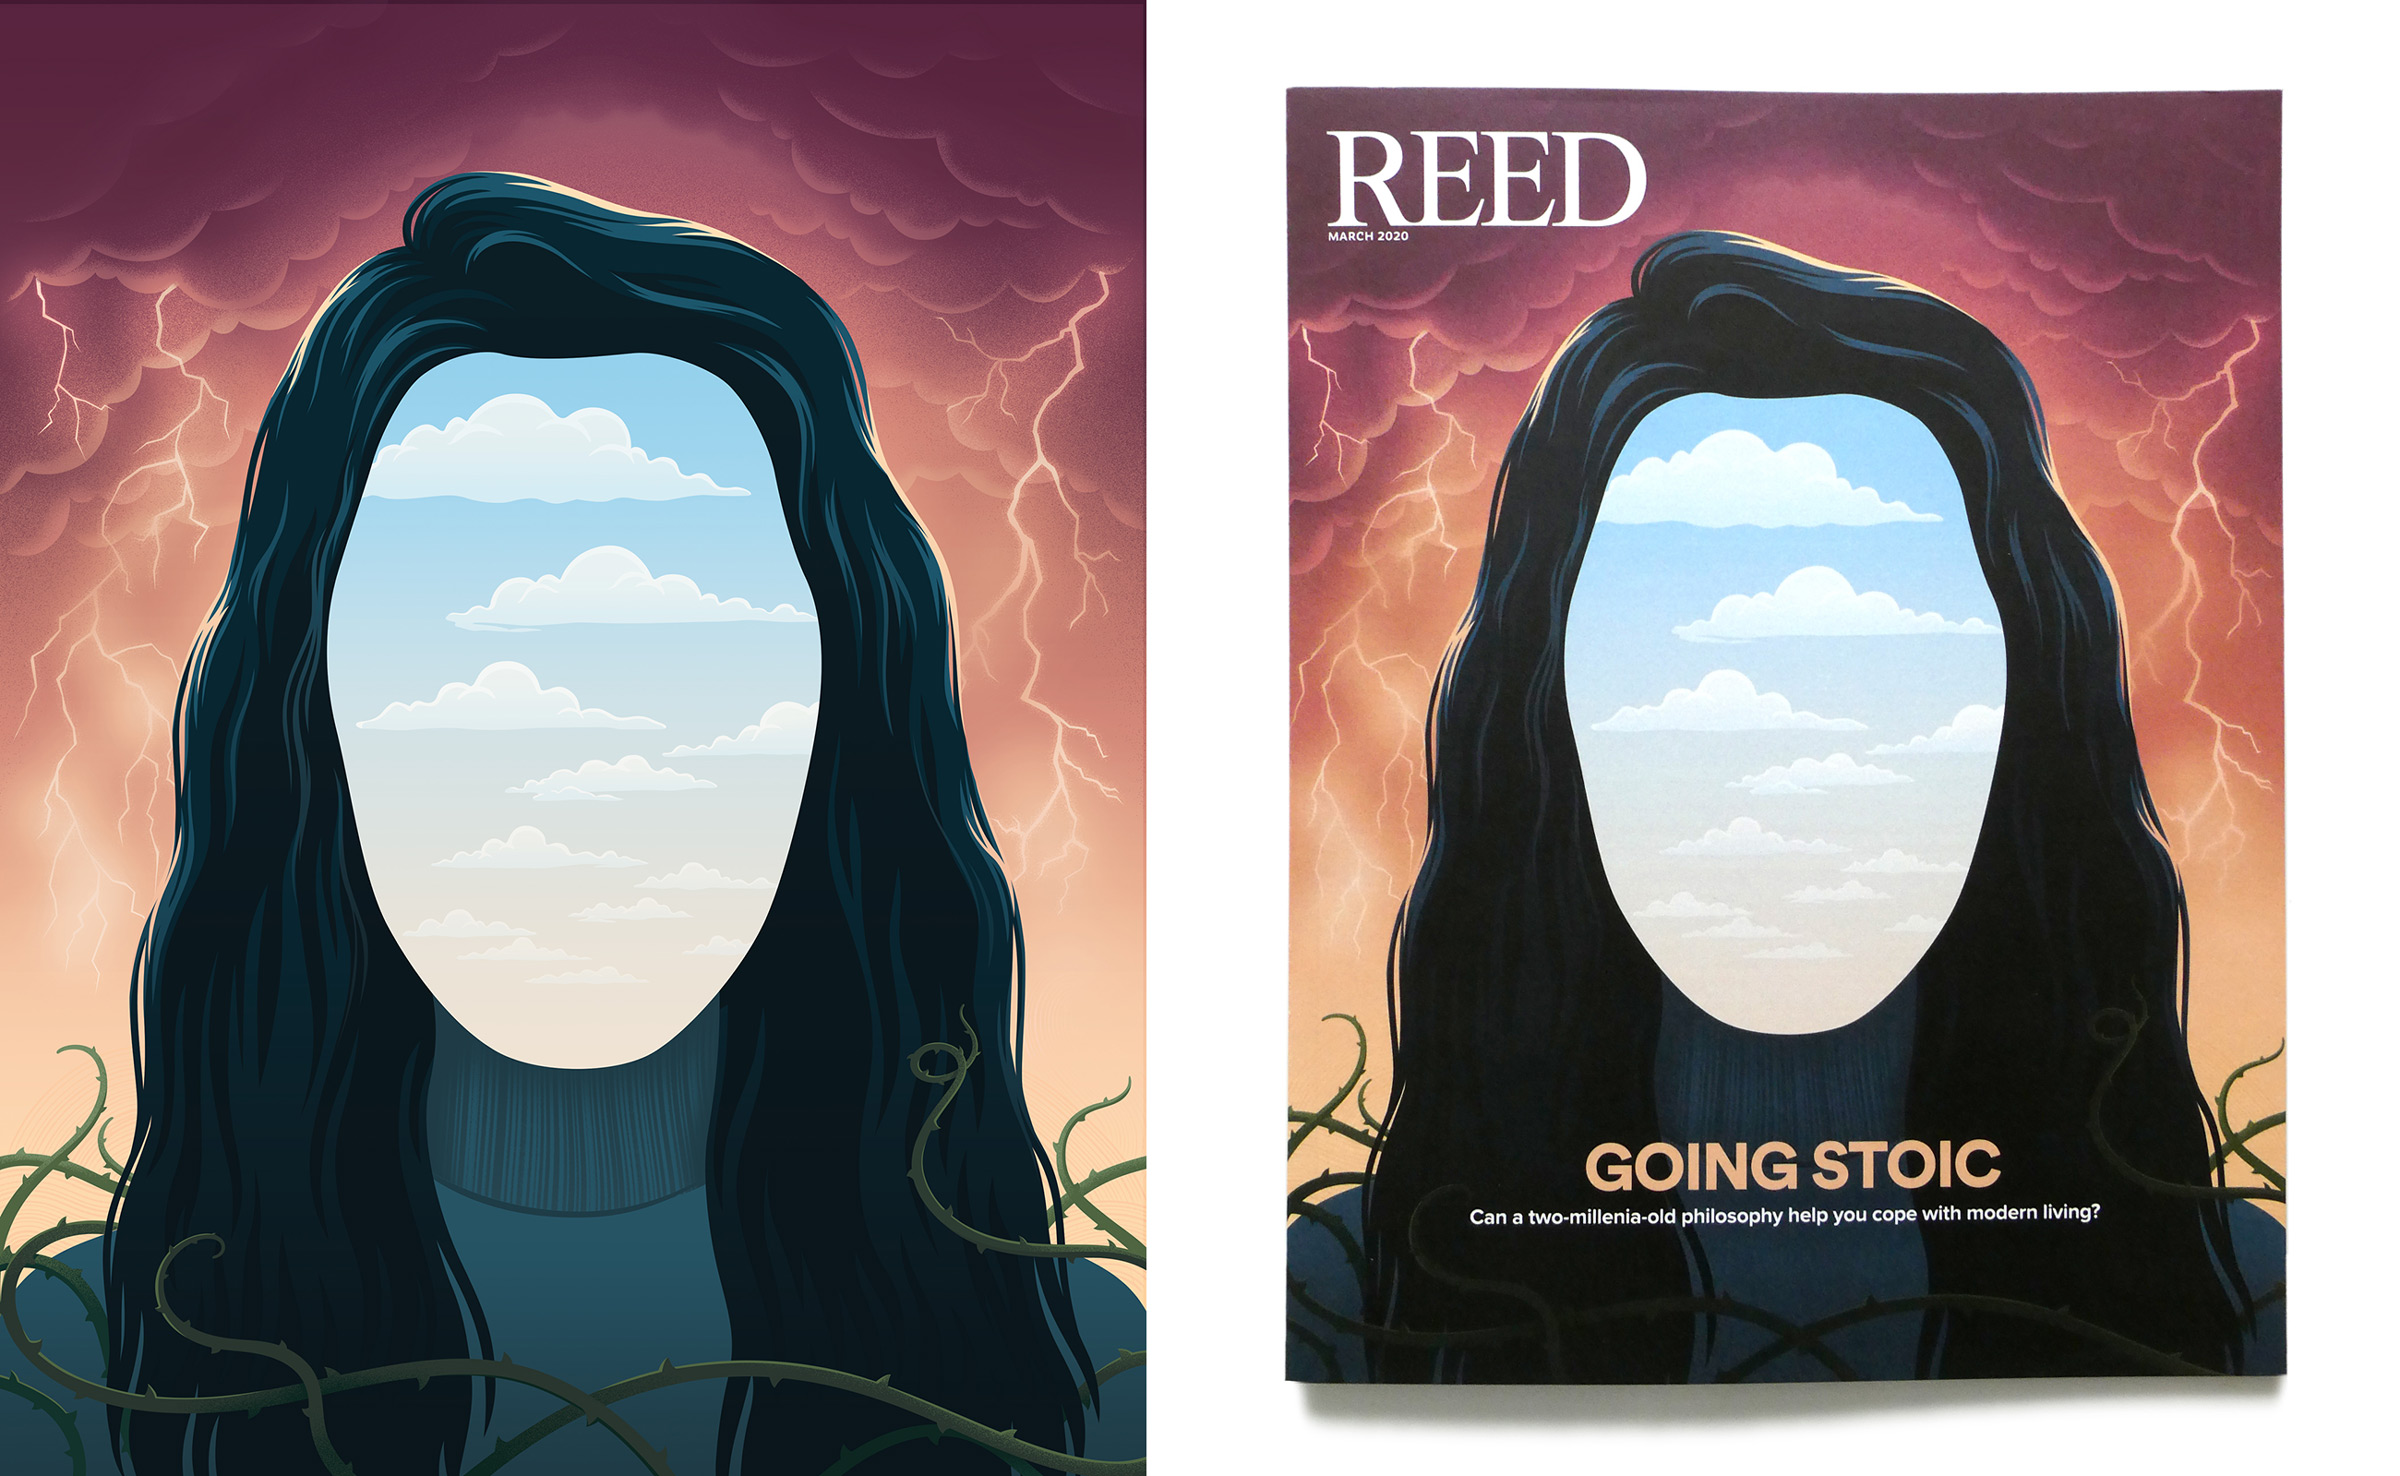 Cover illustration for Reed Magazine, 'Going Stoic'